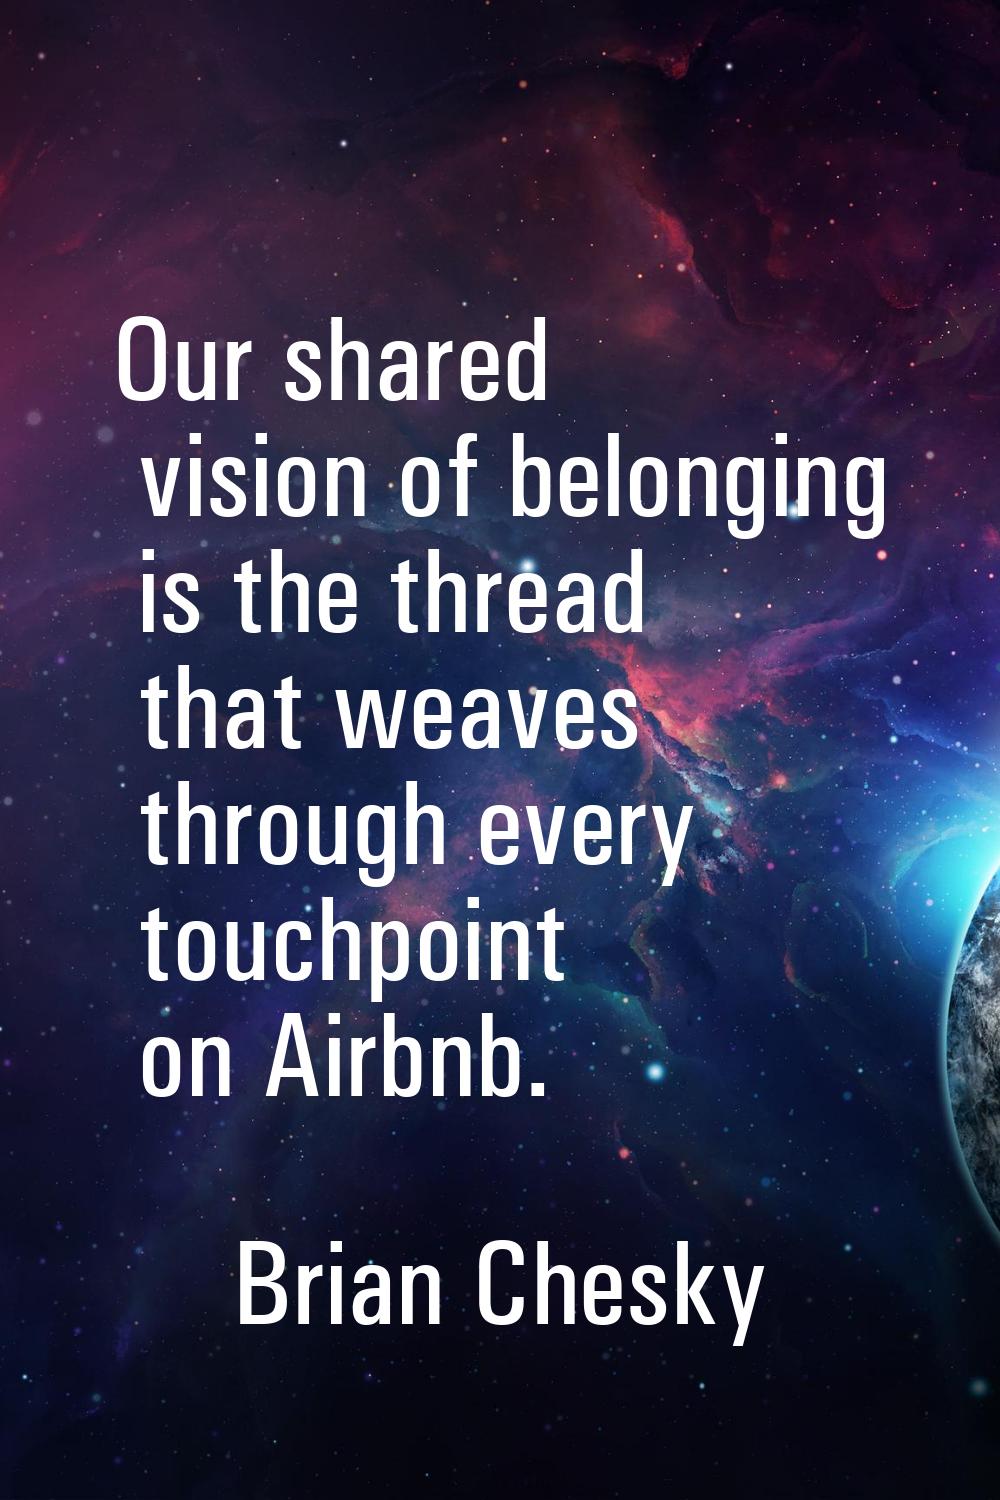 Our shared vision of belonging is the thread that weaves through every touchpoint on Airbnb.